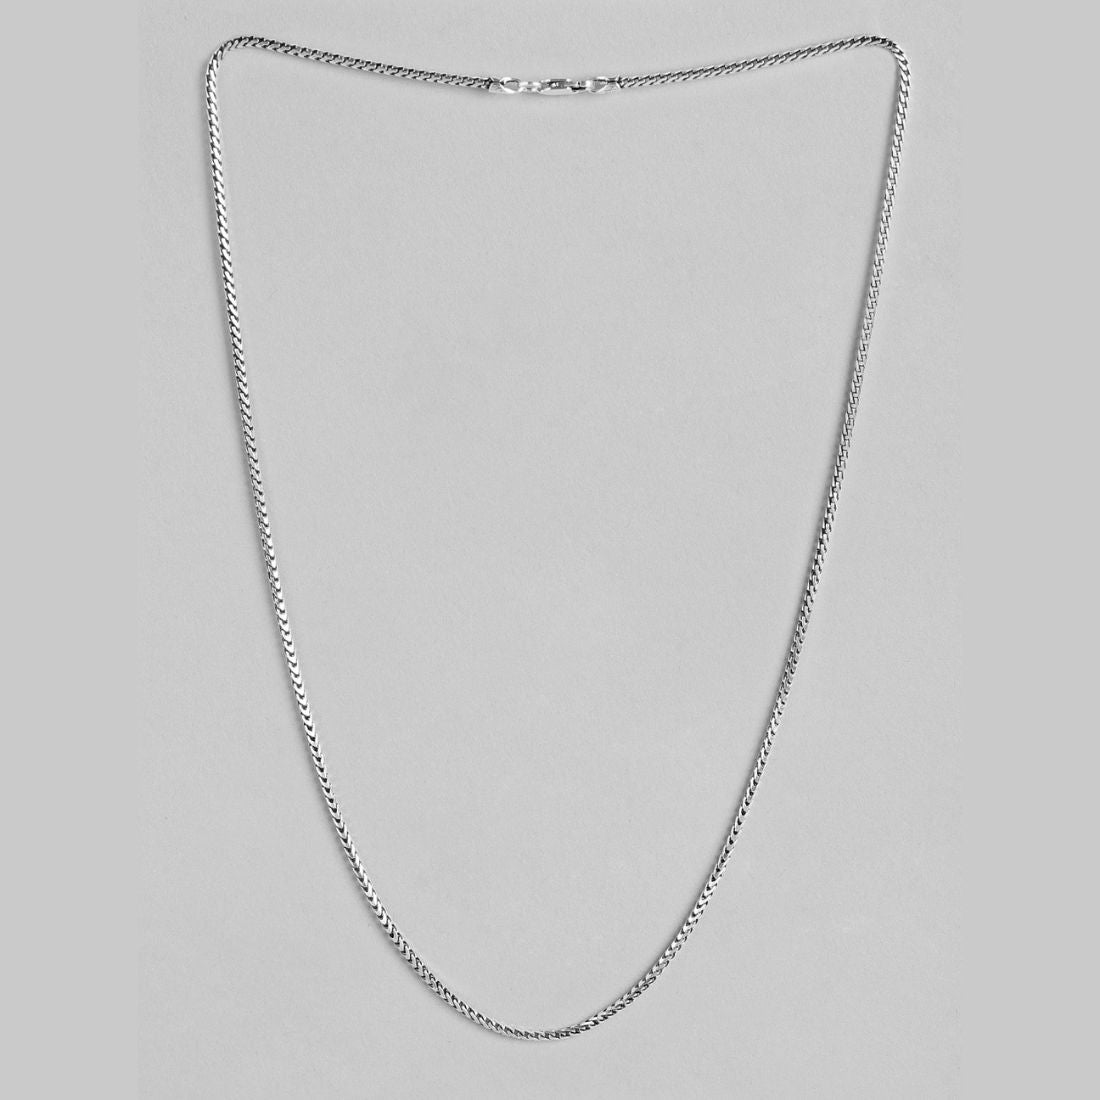 Lustrous Weave Rhodium-Plated 925 Sterling Silver Chain for Men